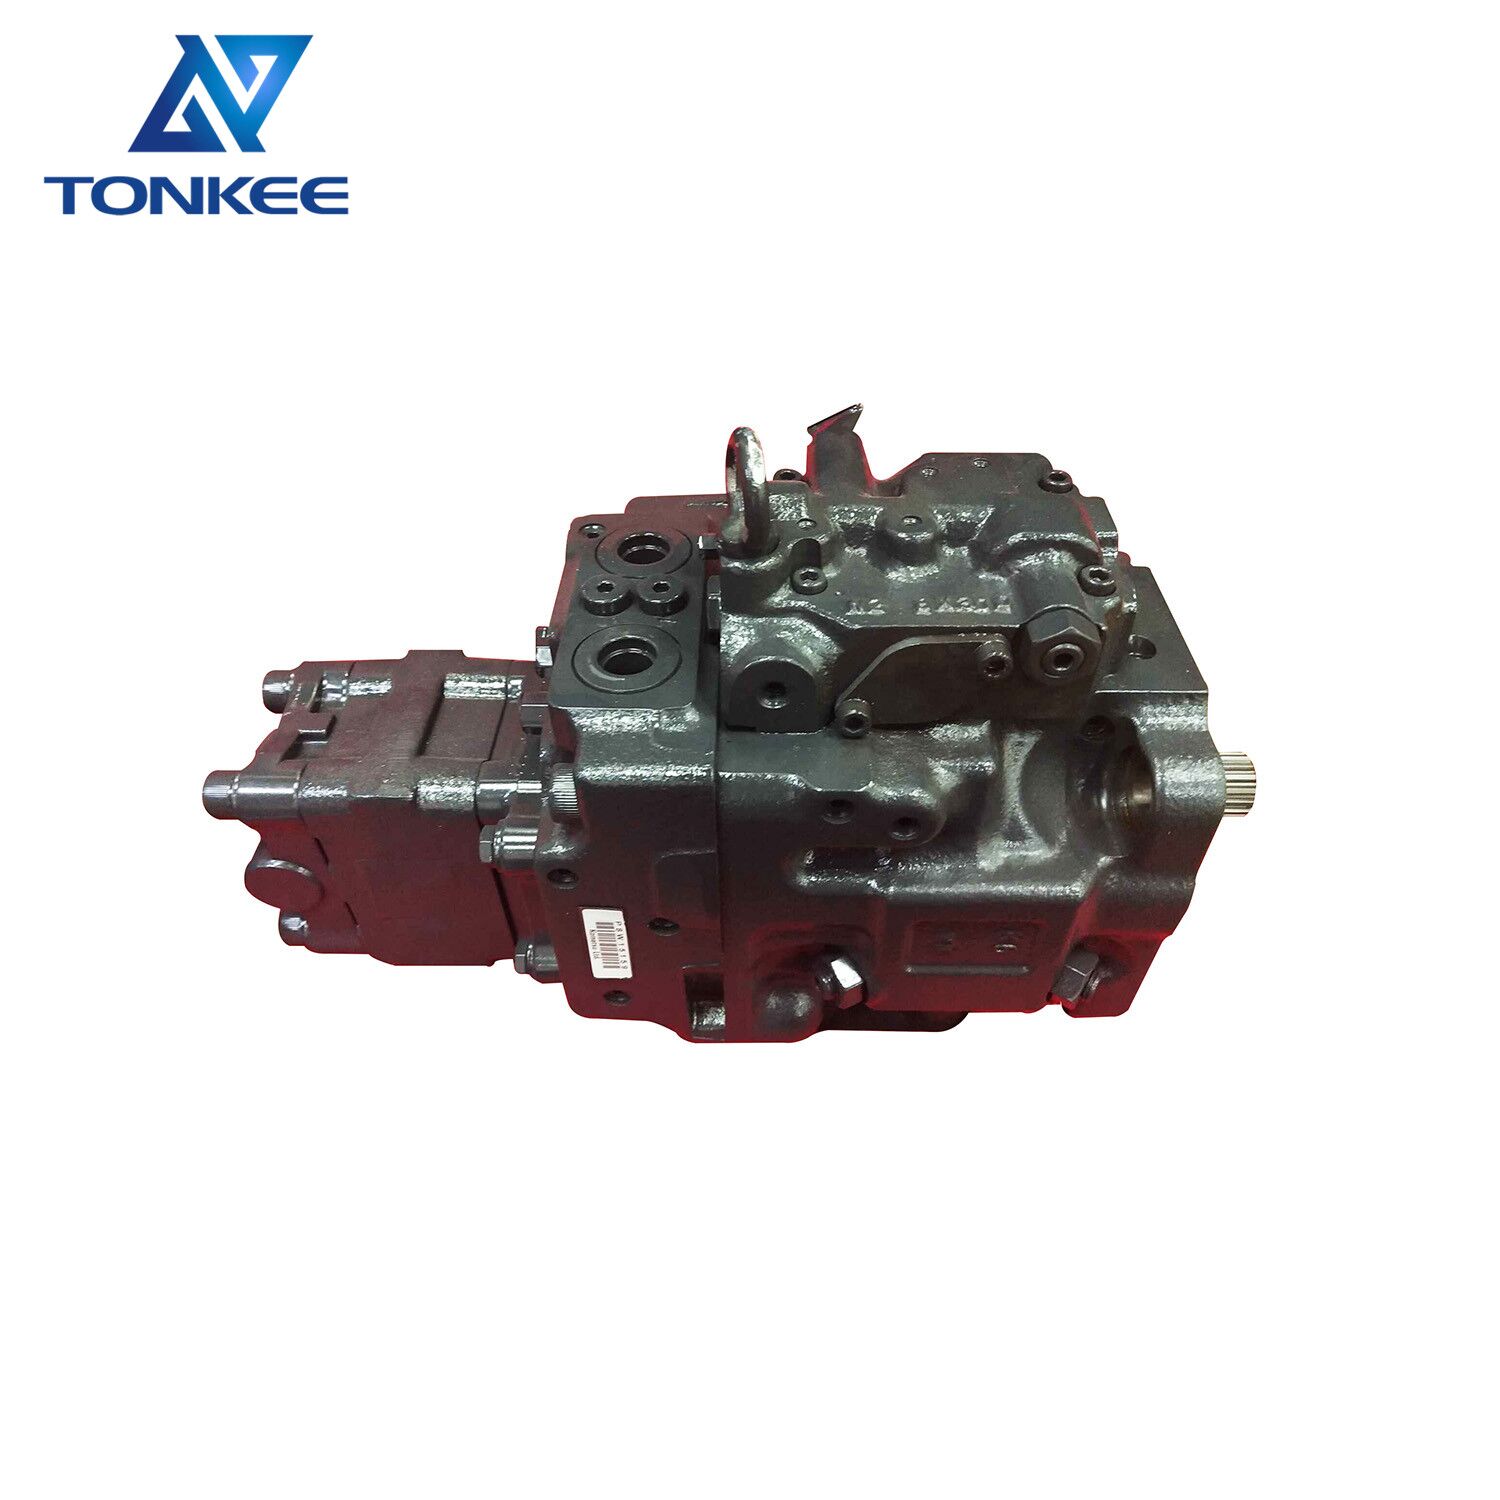 PC40MR-2 PC50MR-2 PC55MR-3 excavator main pump without solenoid 708-3S-04570 708-3S-00461 708-3S-00460 708-3S-00522 708-3S-00521 708-3S-00830 hydraulic piston pump assembly suitable for KOMATSU